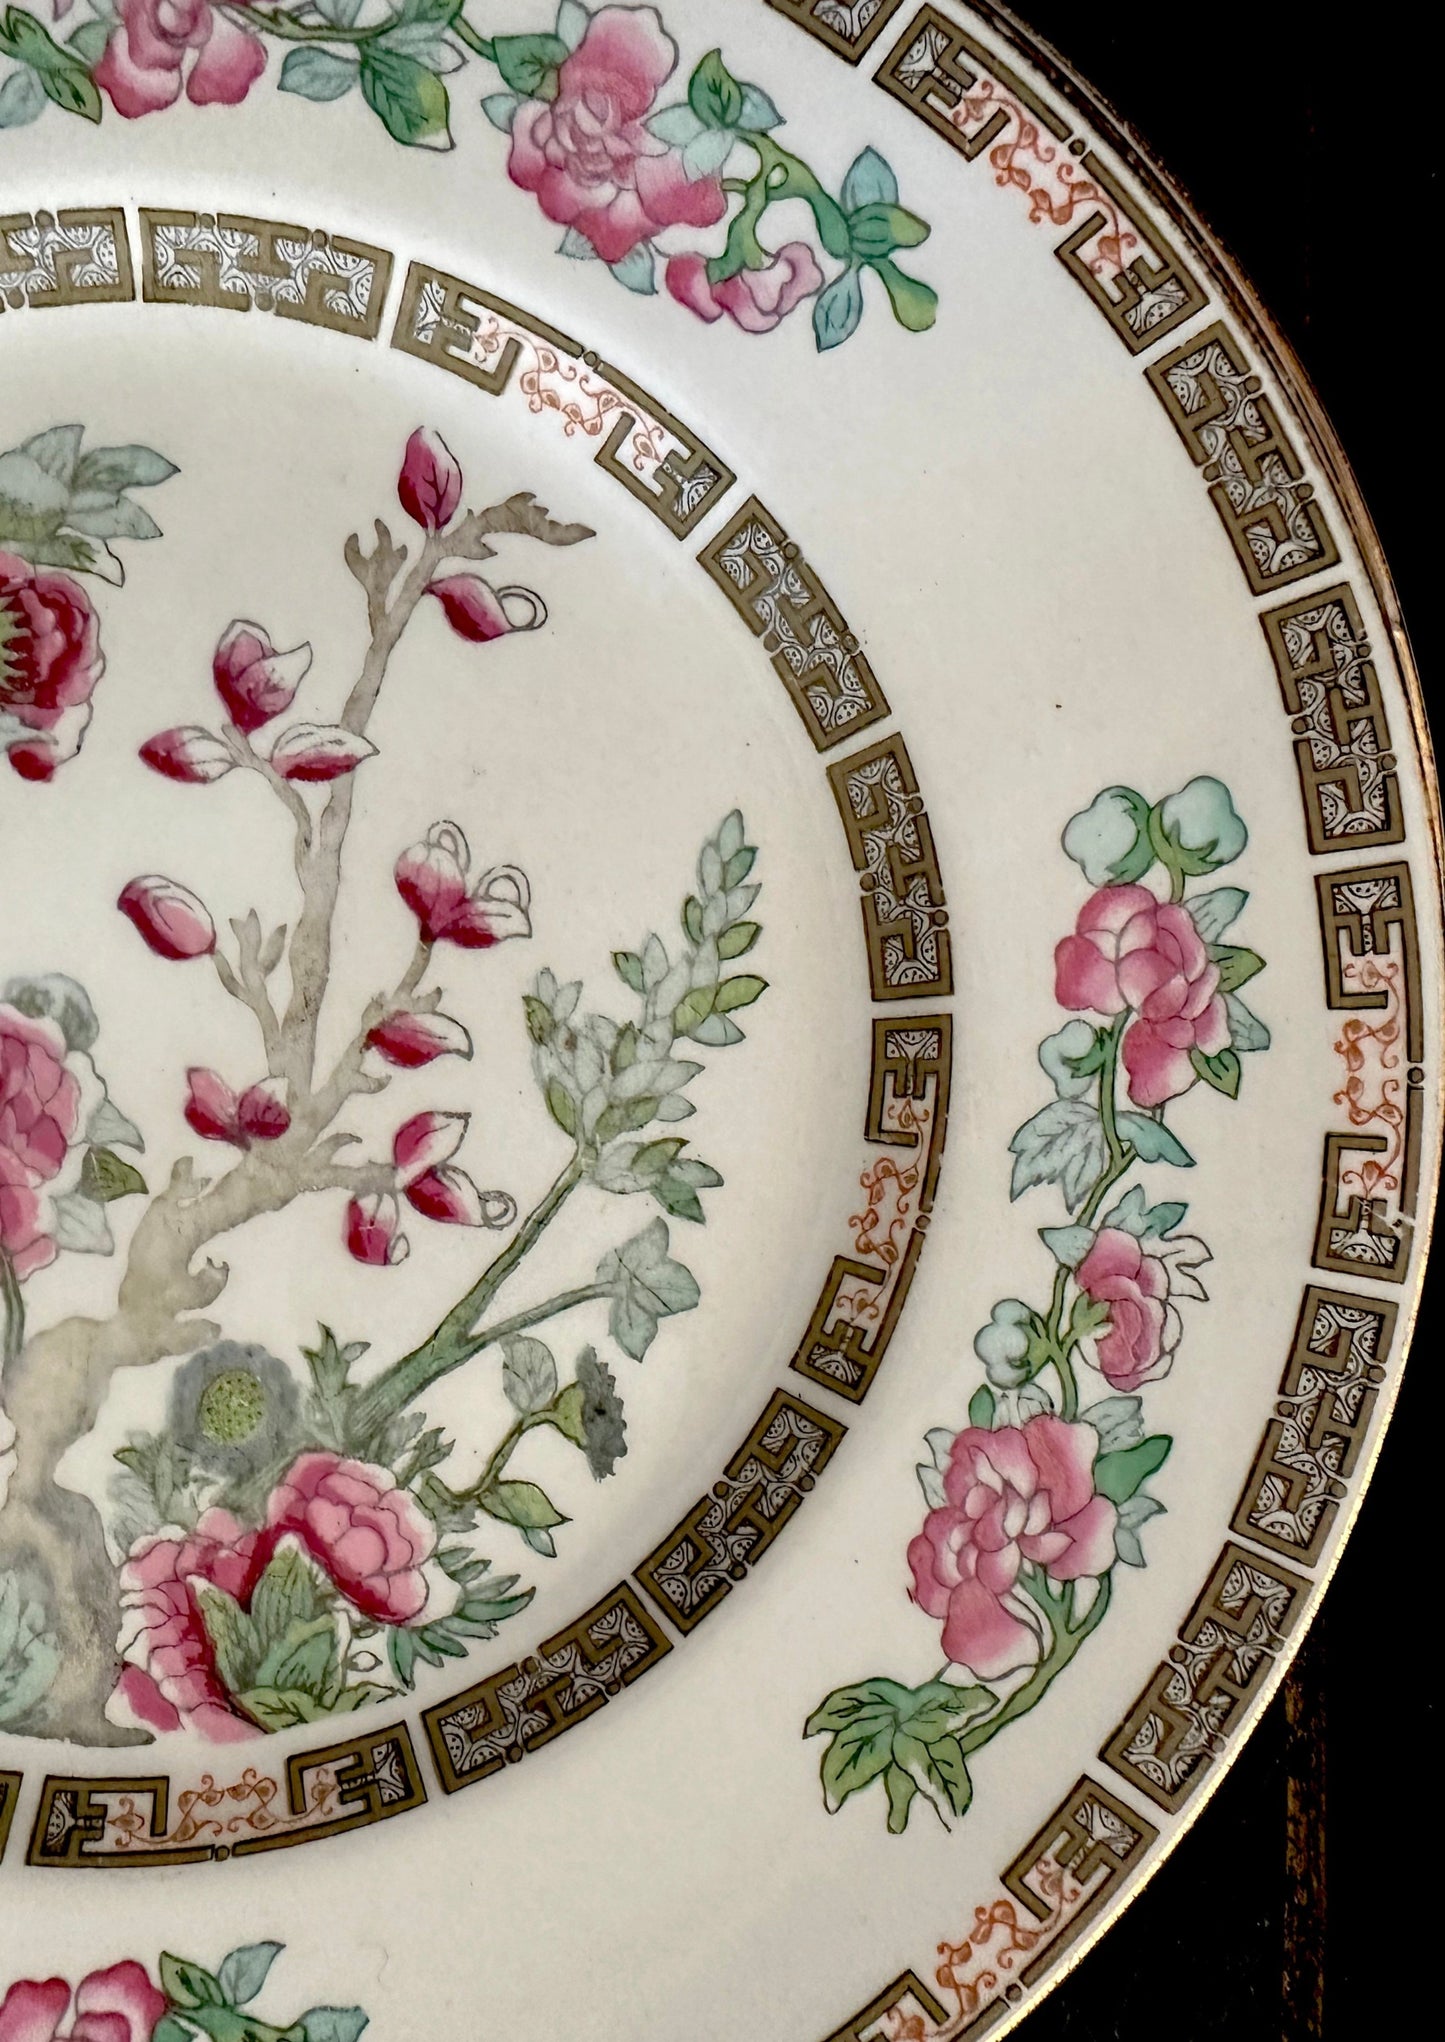 Salad Plates with Indian Tree design by John Maddock and Sons #IndianTree #JohnMaddock #GoldTrim - DharBazaar